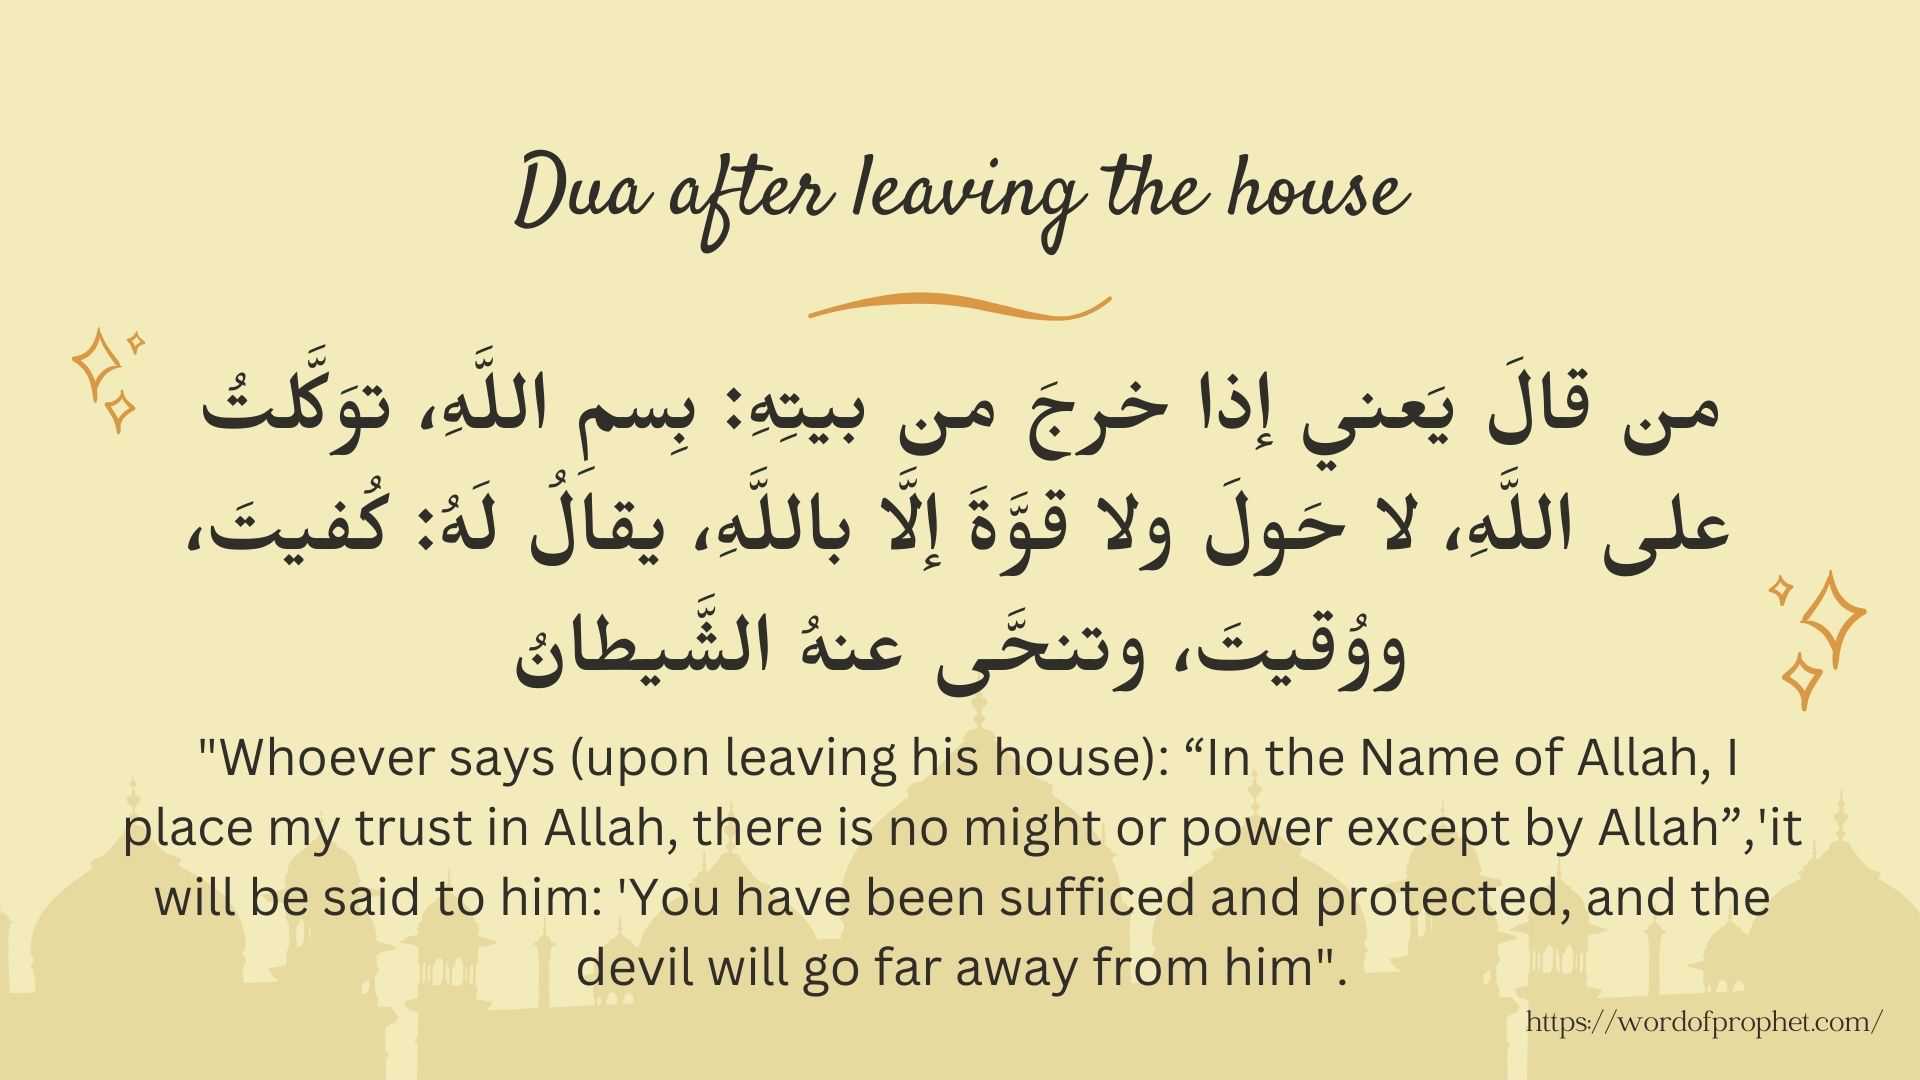 Dua after leaving the house